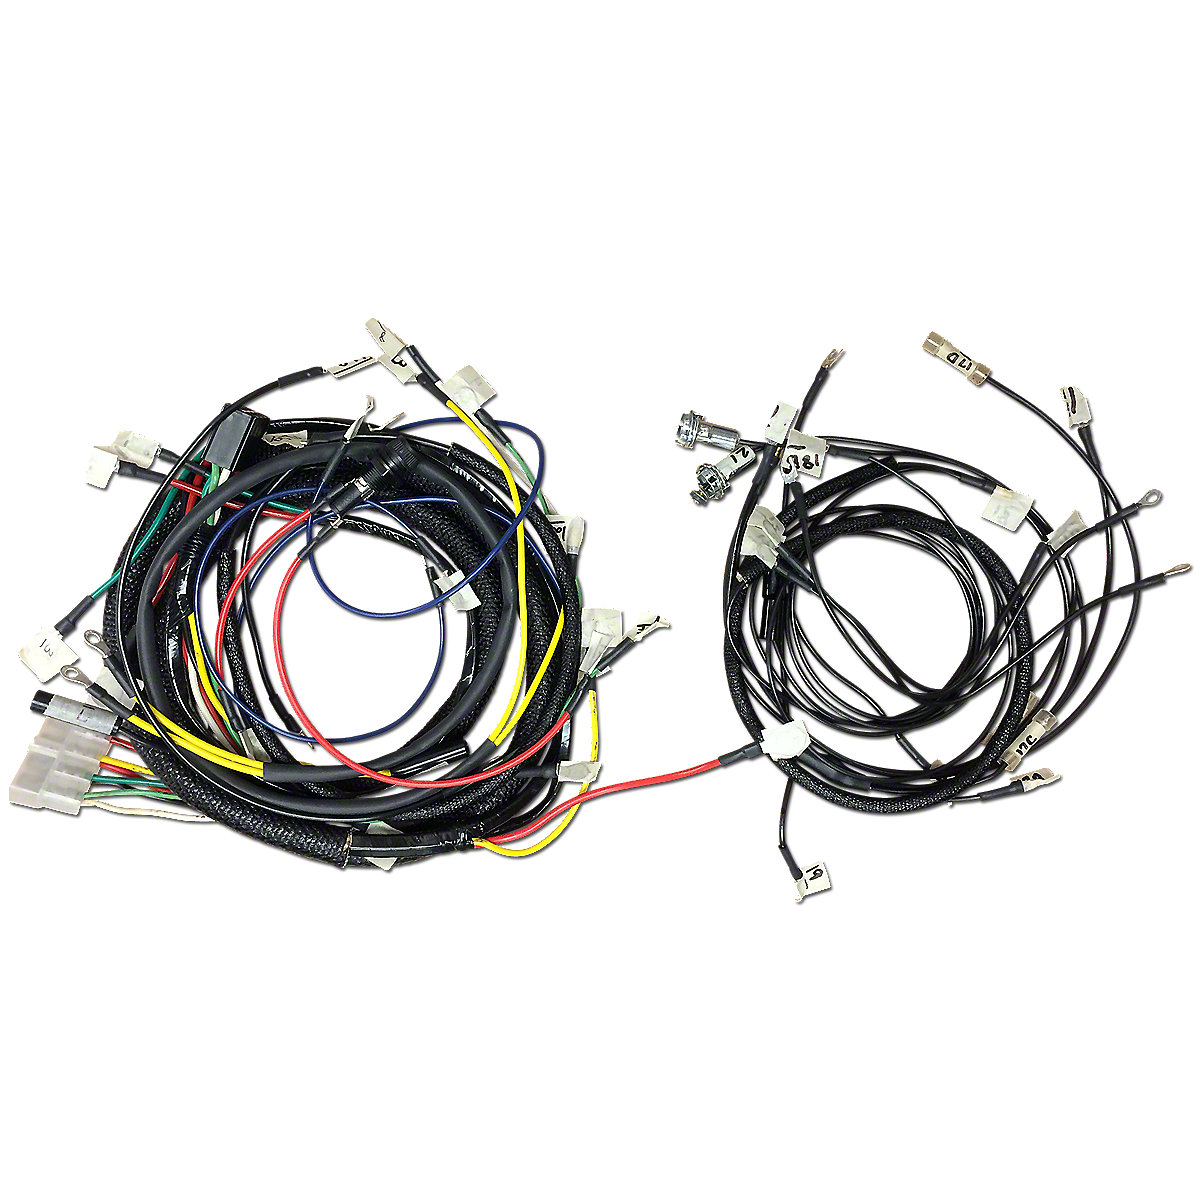 UCA40413     Wiring Harness---Replaces A35304, G44066